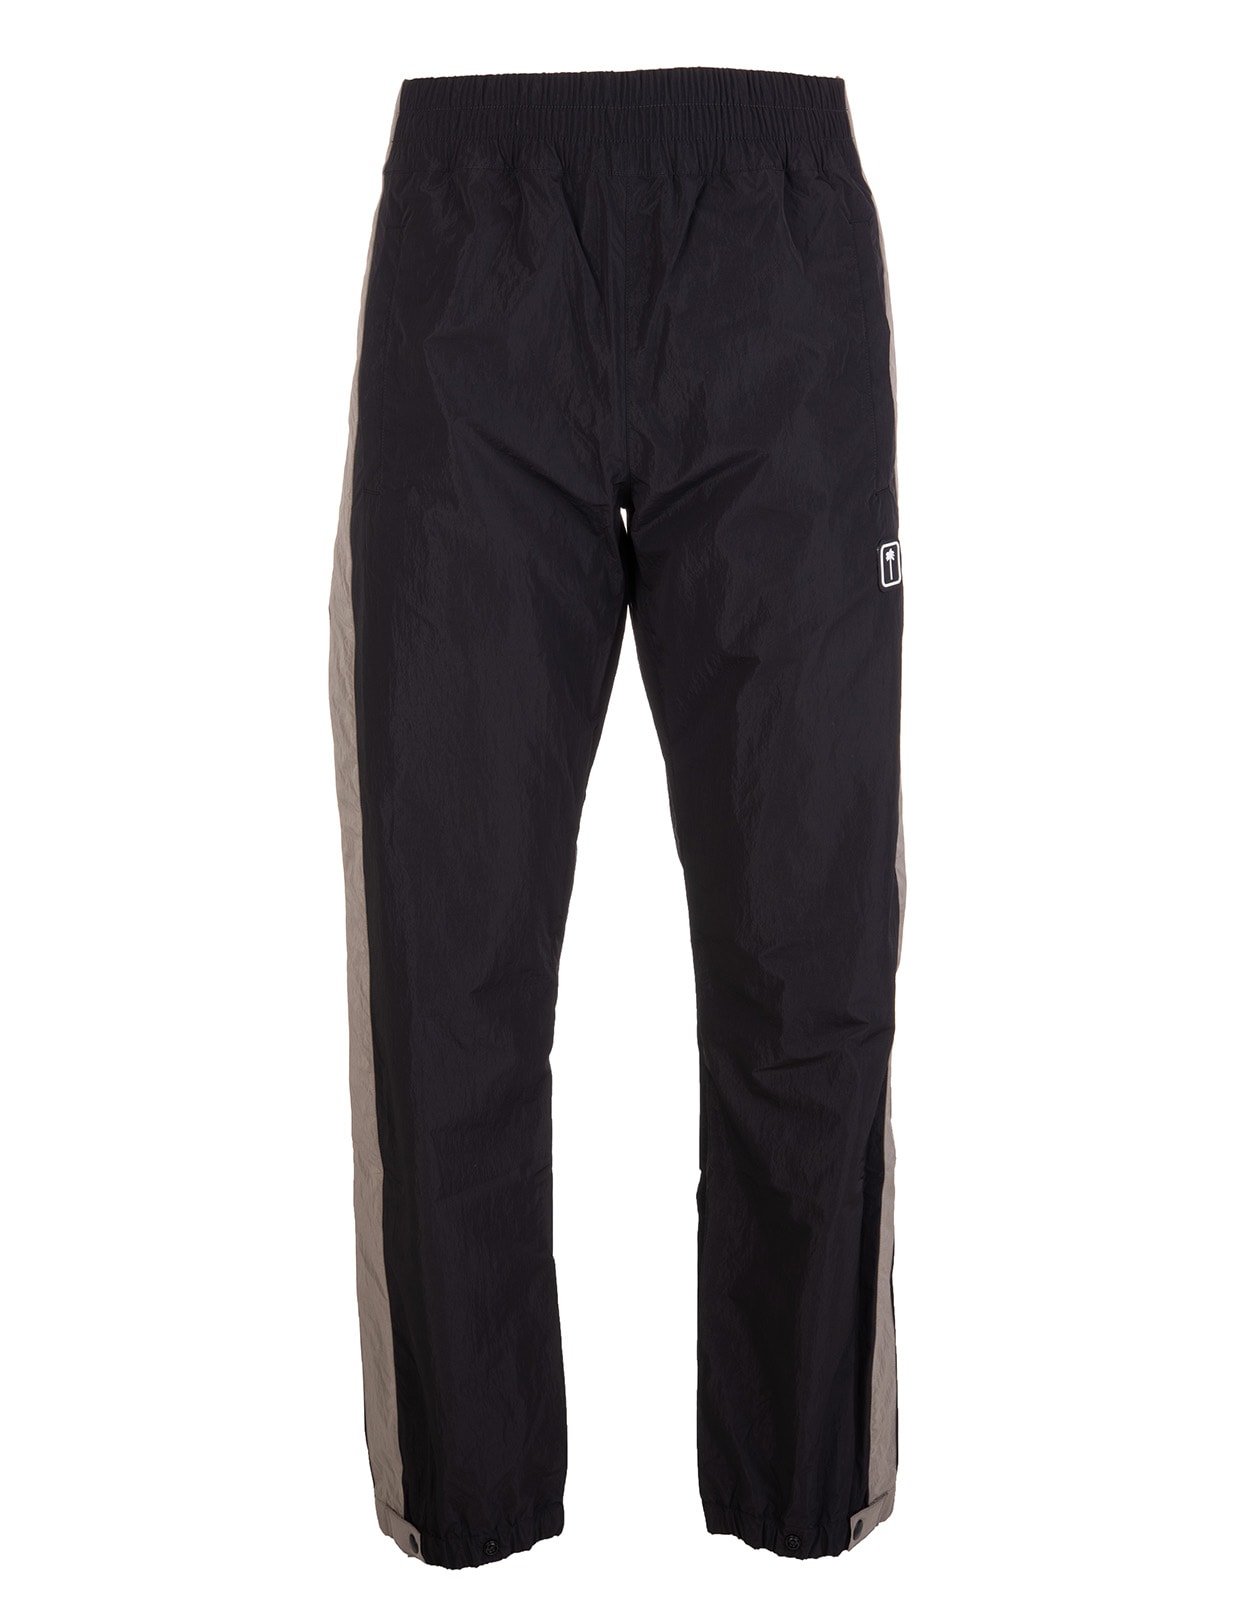 Palm Angels Man Joggers In Black Technical Fabric With Palm Patch And Contrast Bands